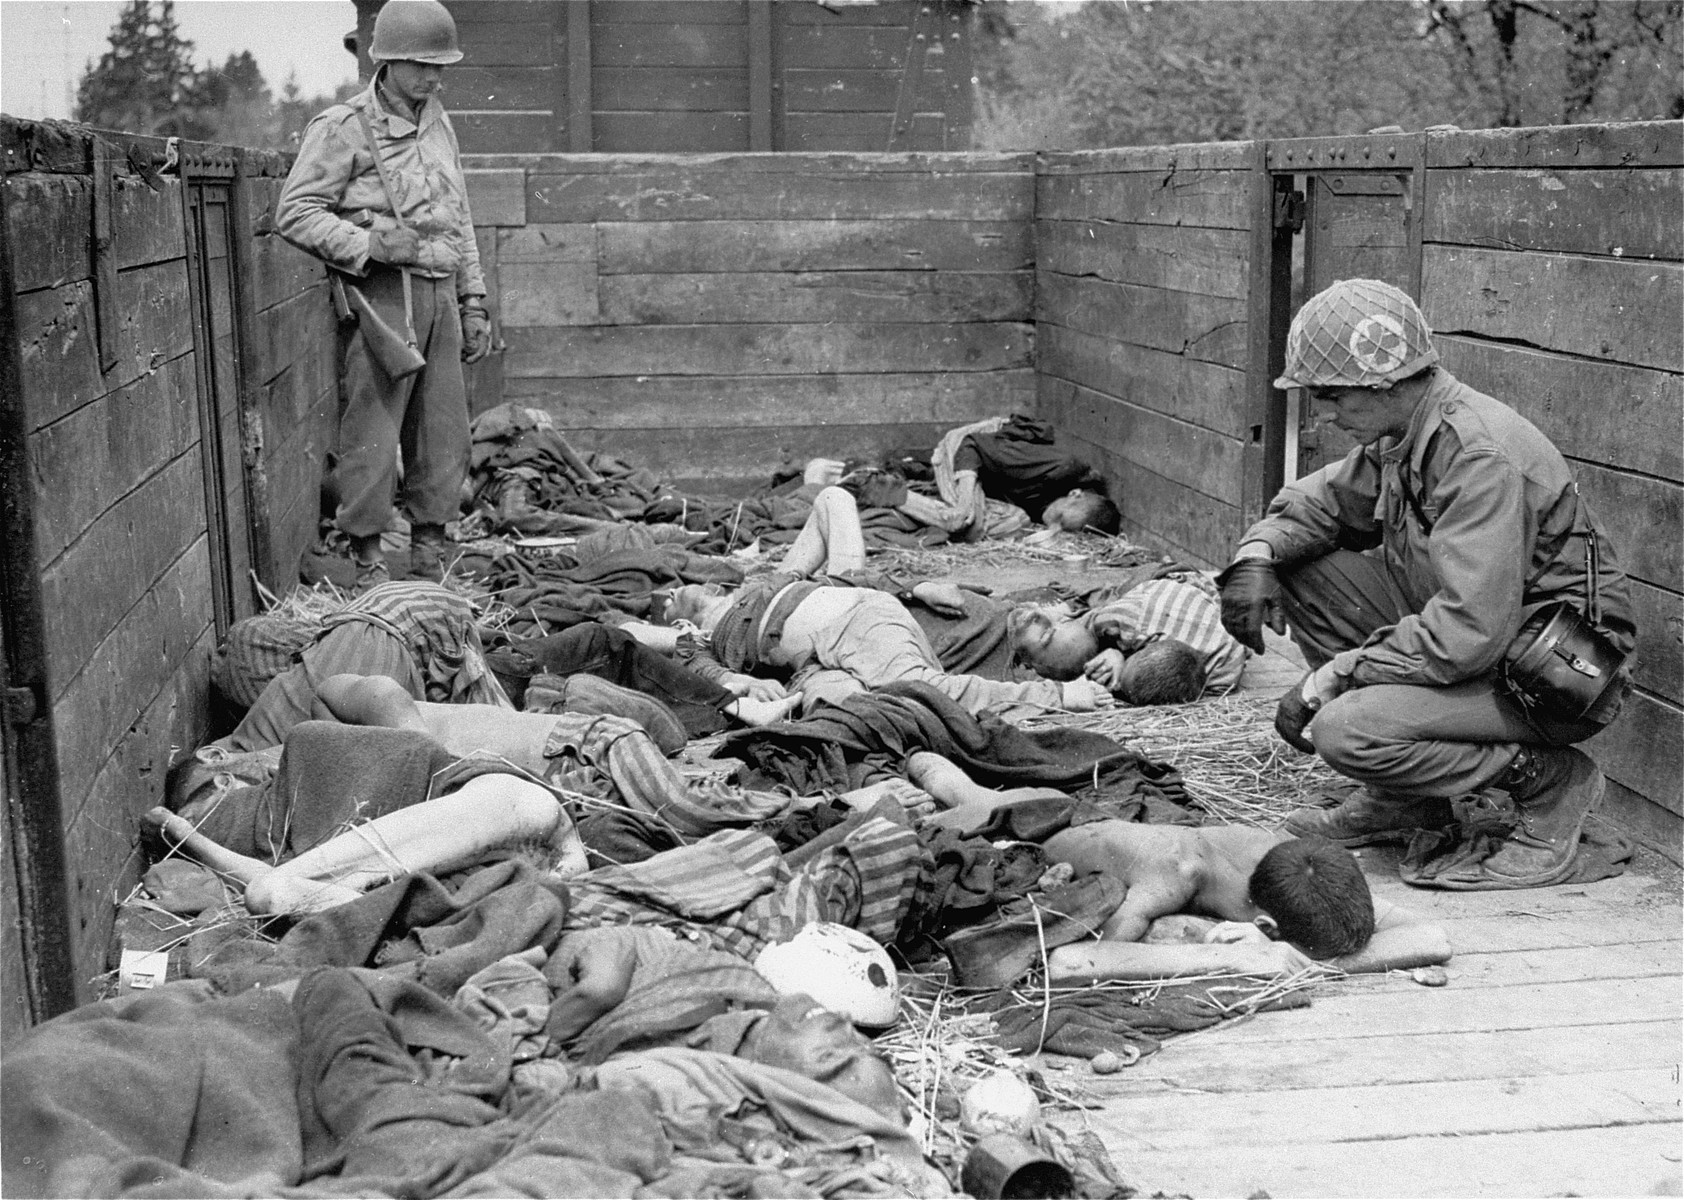 Medical corpsmen of the Seventh US Army view the bodies in one of the open railcars of the Dachau death train.

The soldier standing in the rear of the car is Kenneth Dean Johnston.